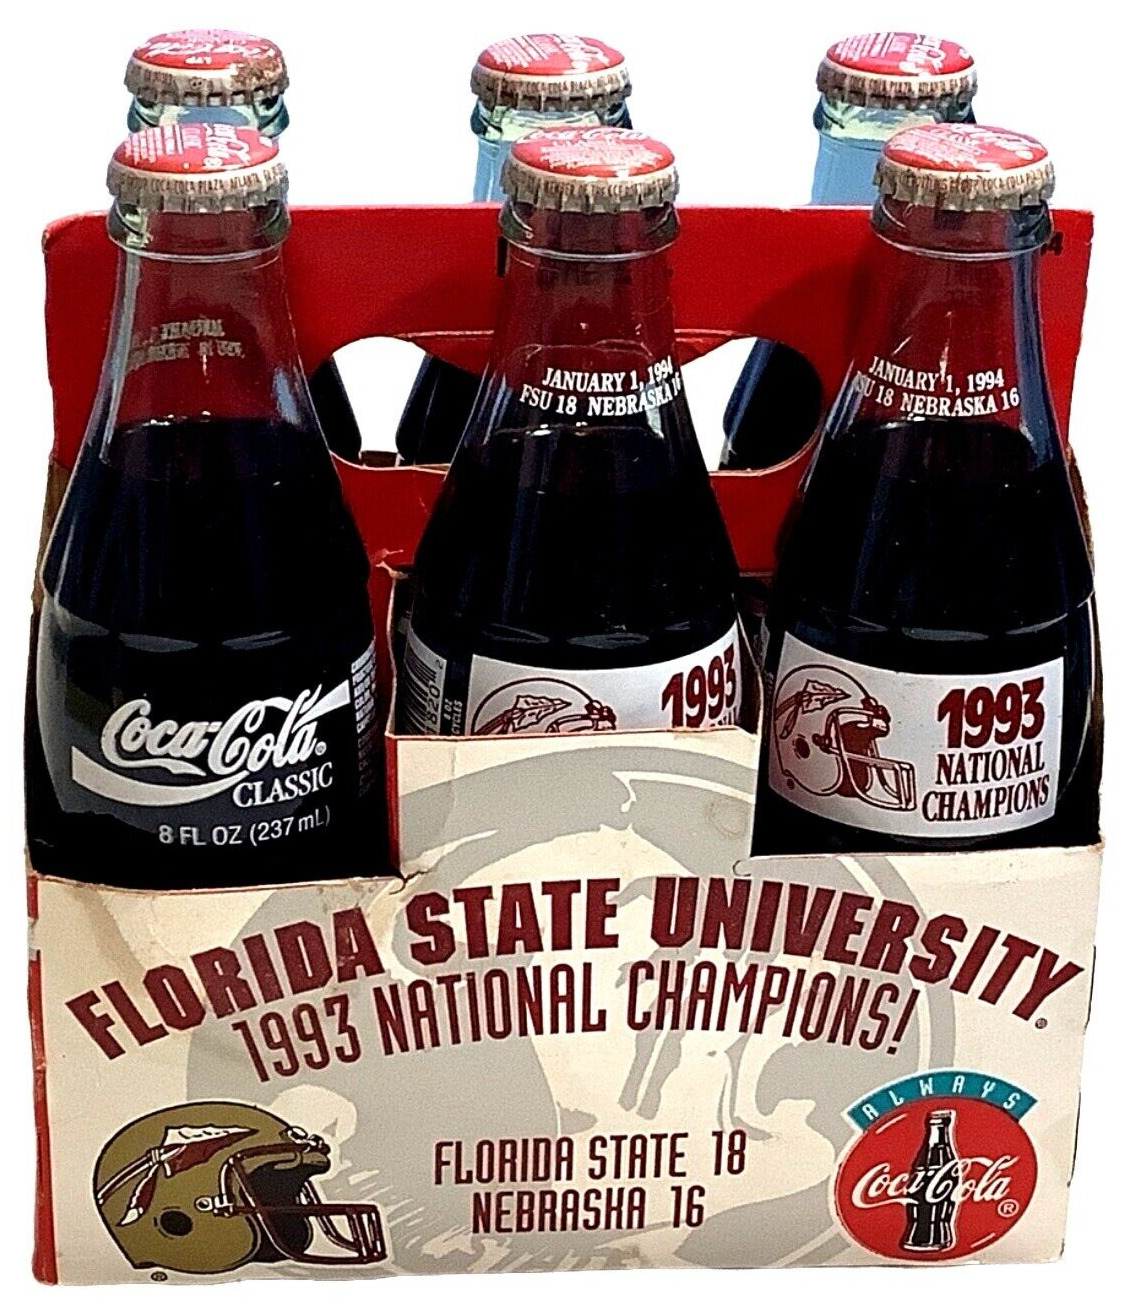 Florida State National Champions 1993 CocaCola Classic Bottles 6 Pack Vintage